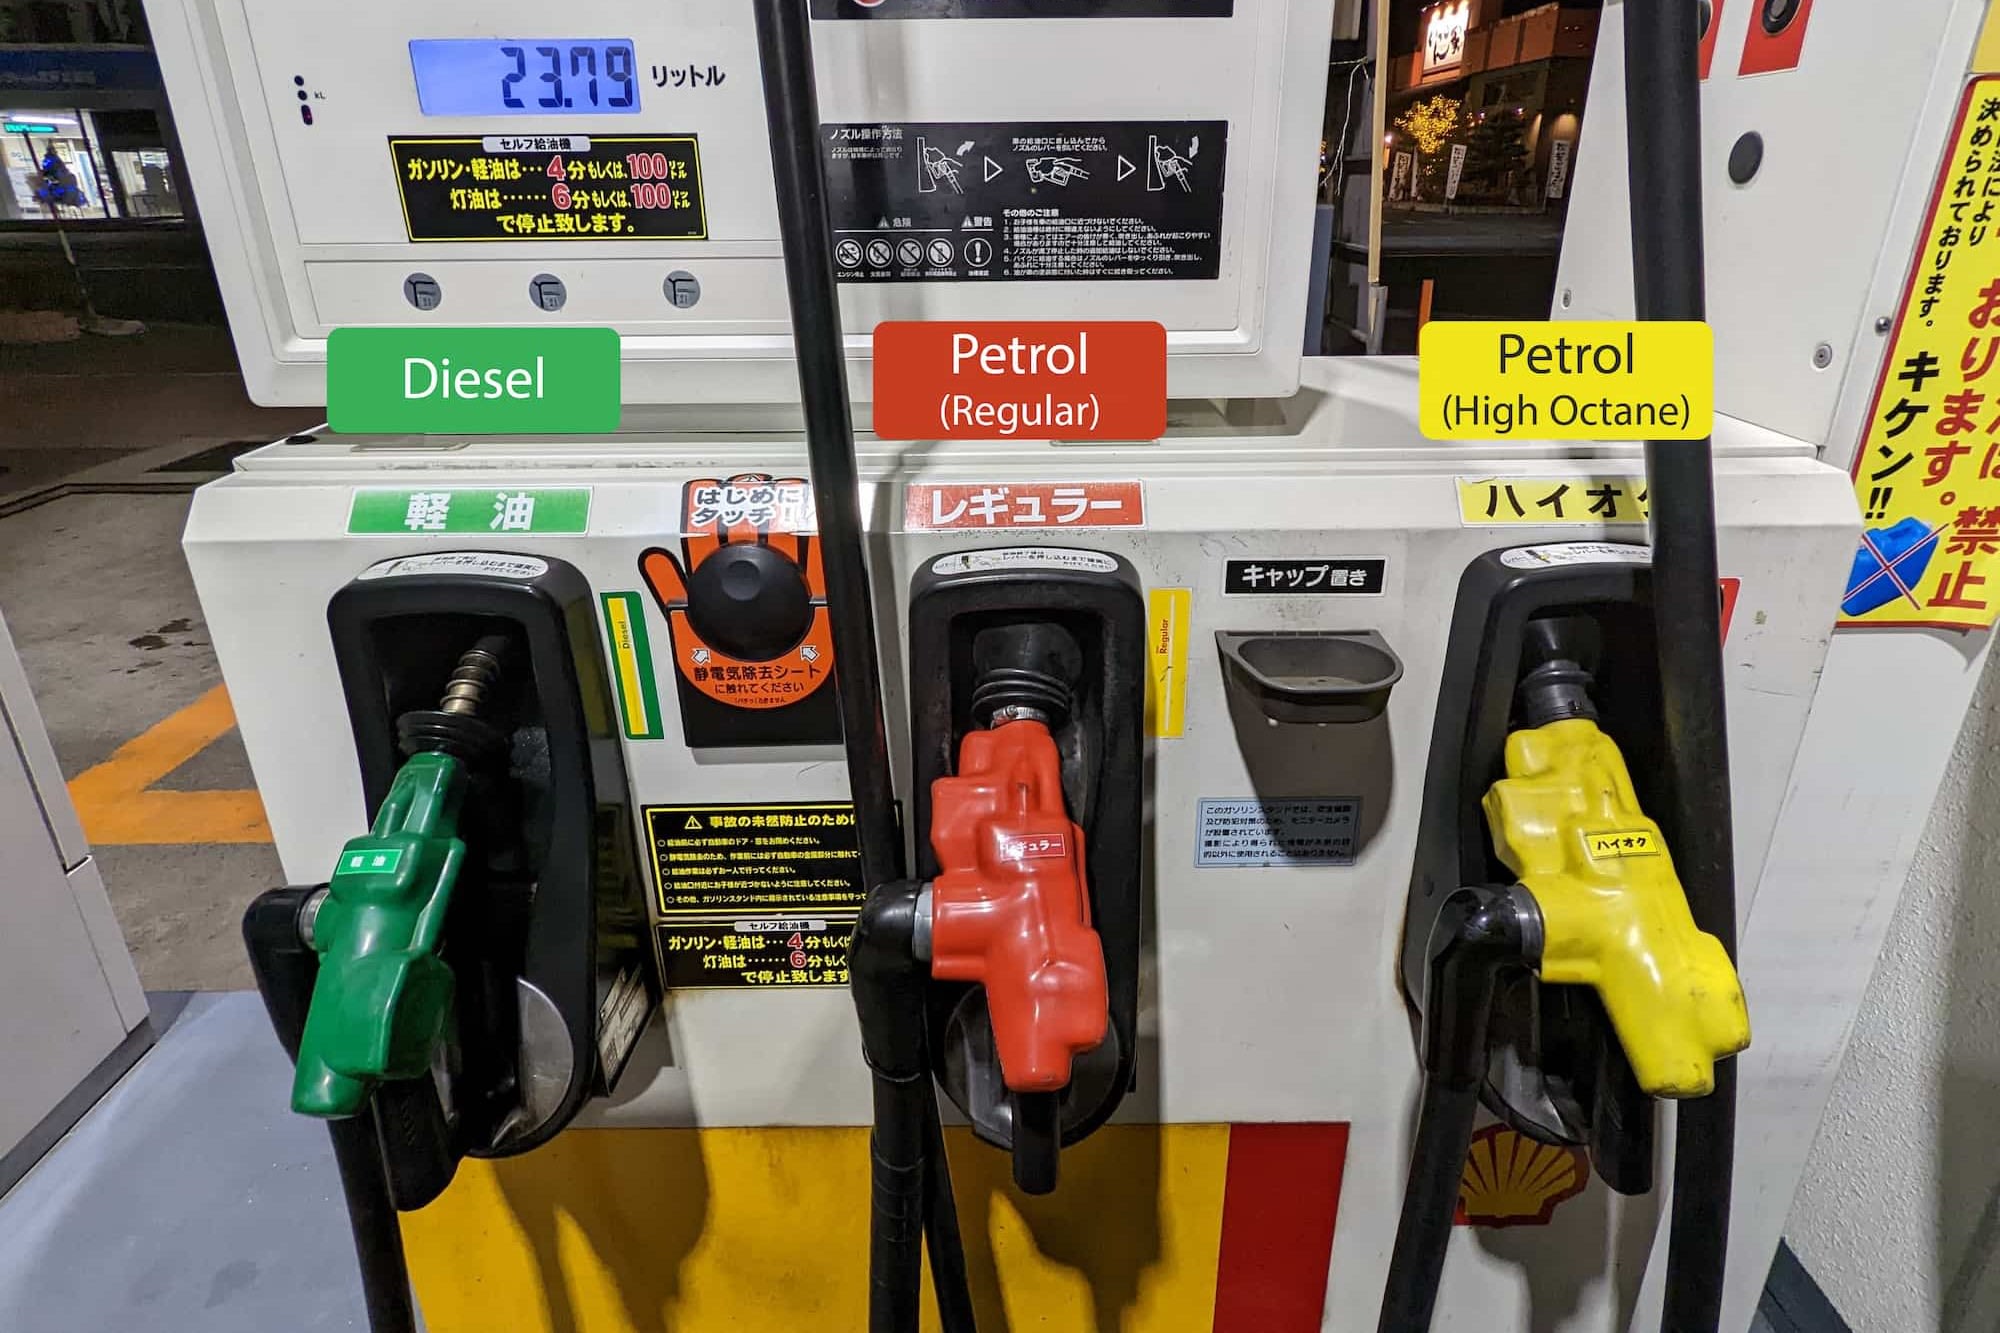 Japanese petrol and diesel pumps with English labels showing, Diesel, Regular Petrol and High Octane Petrol.